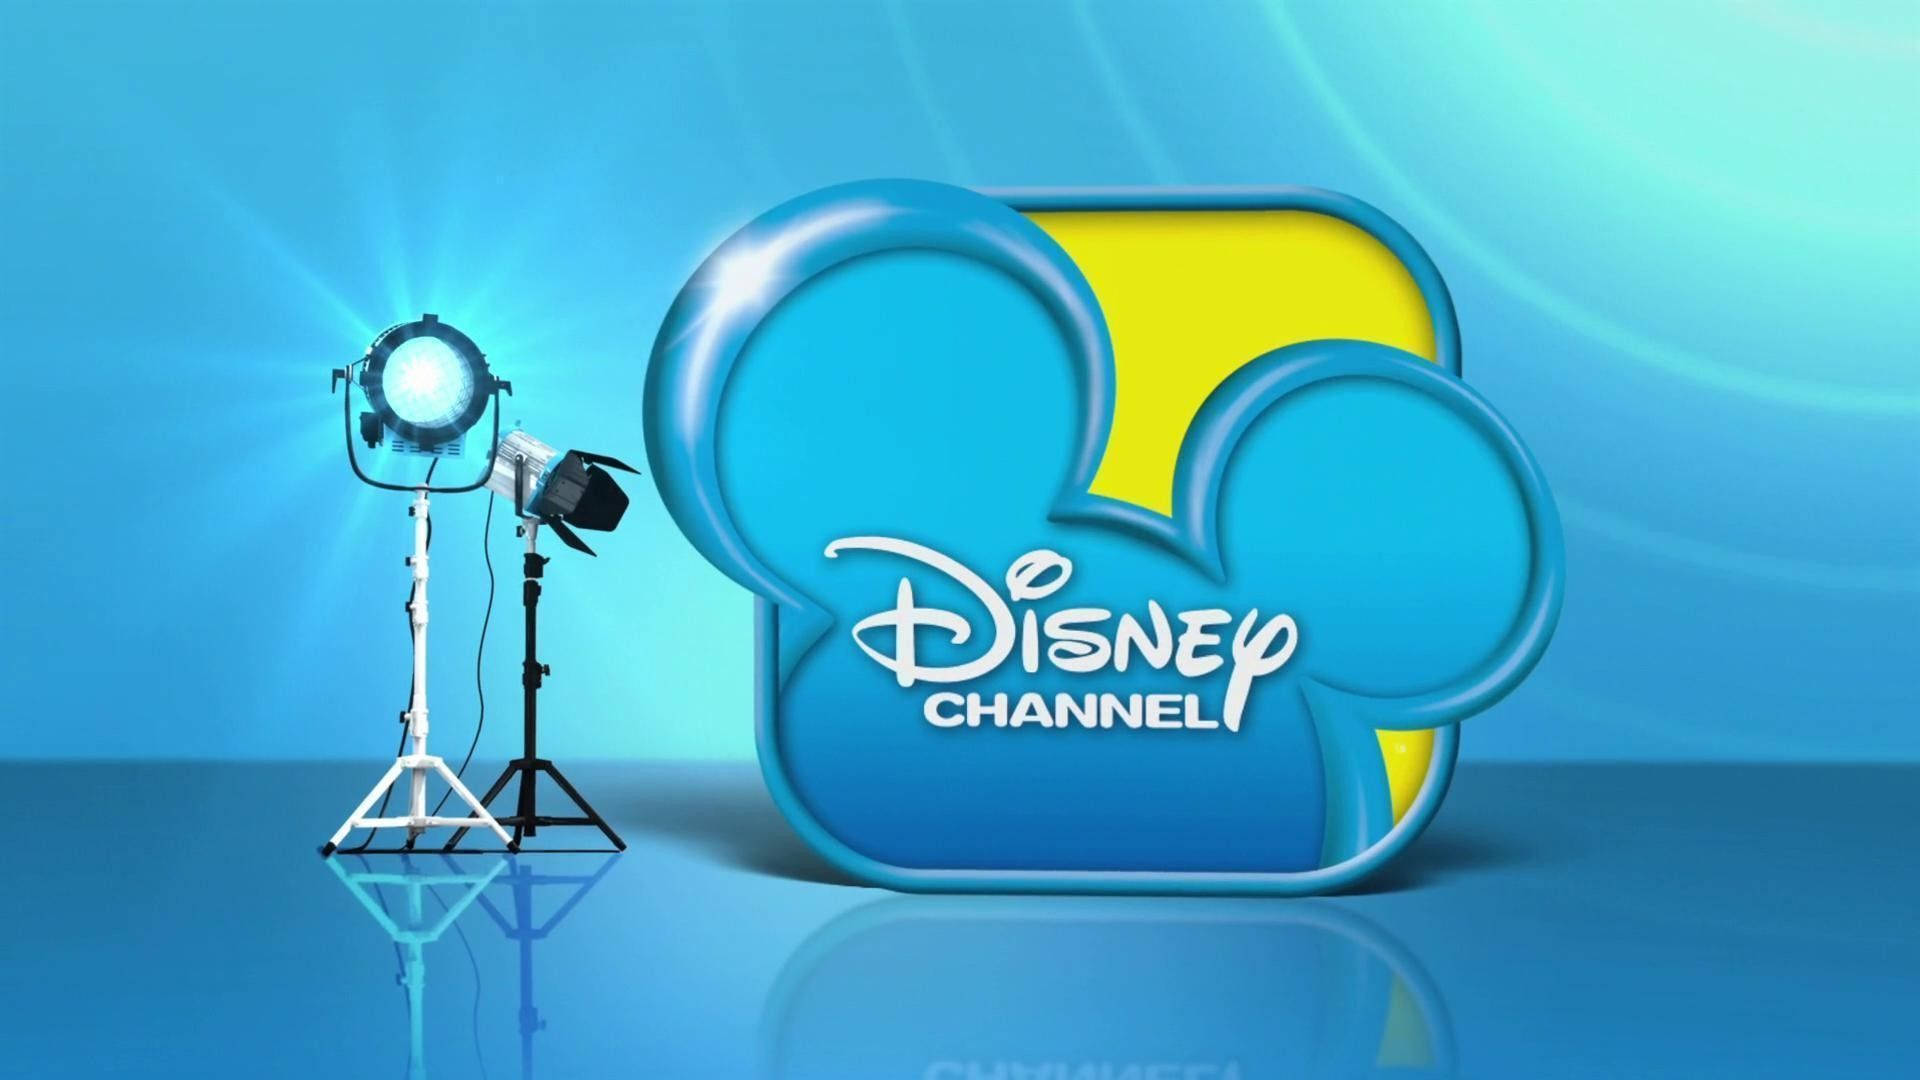 Disney Xd And Disney Channel Background